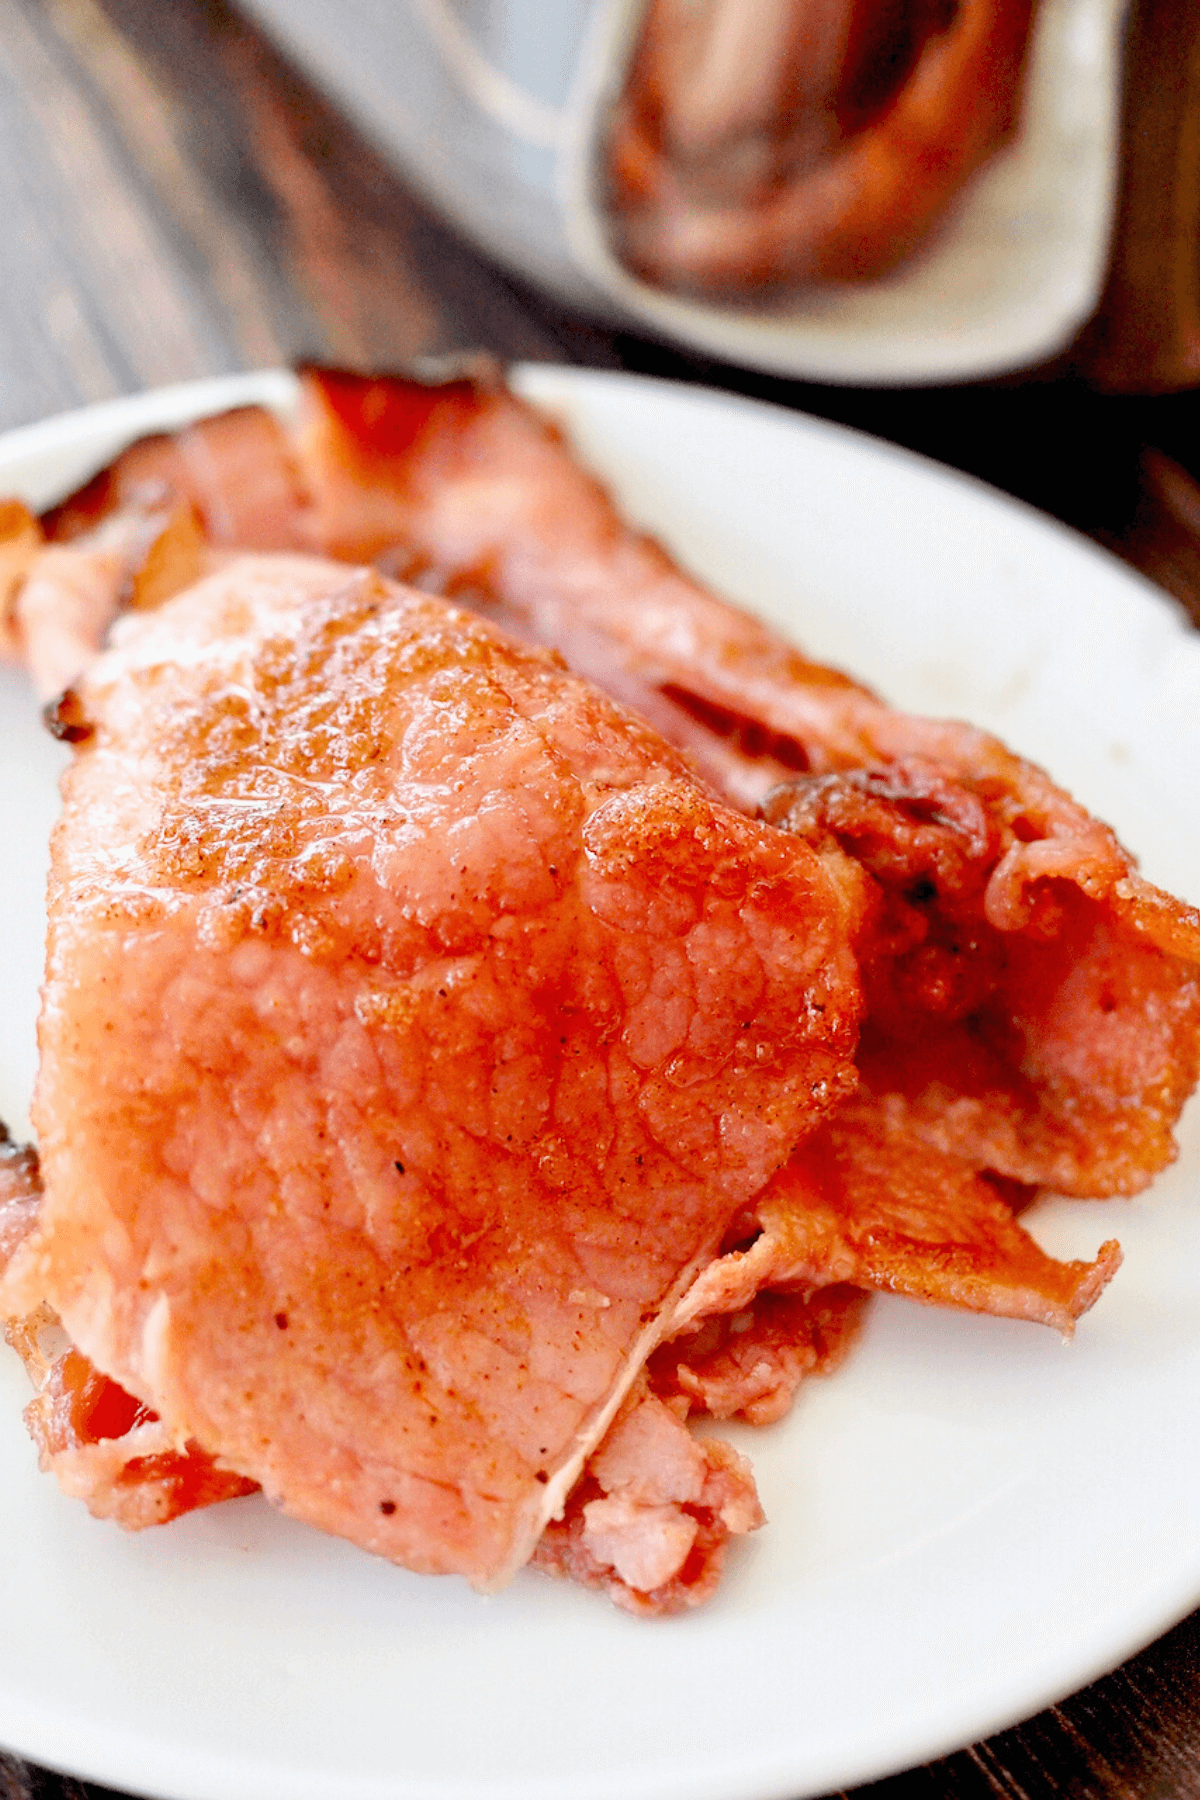 Slices on plate of honey baked ham with sugary and crispy crust.